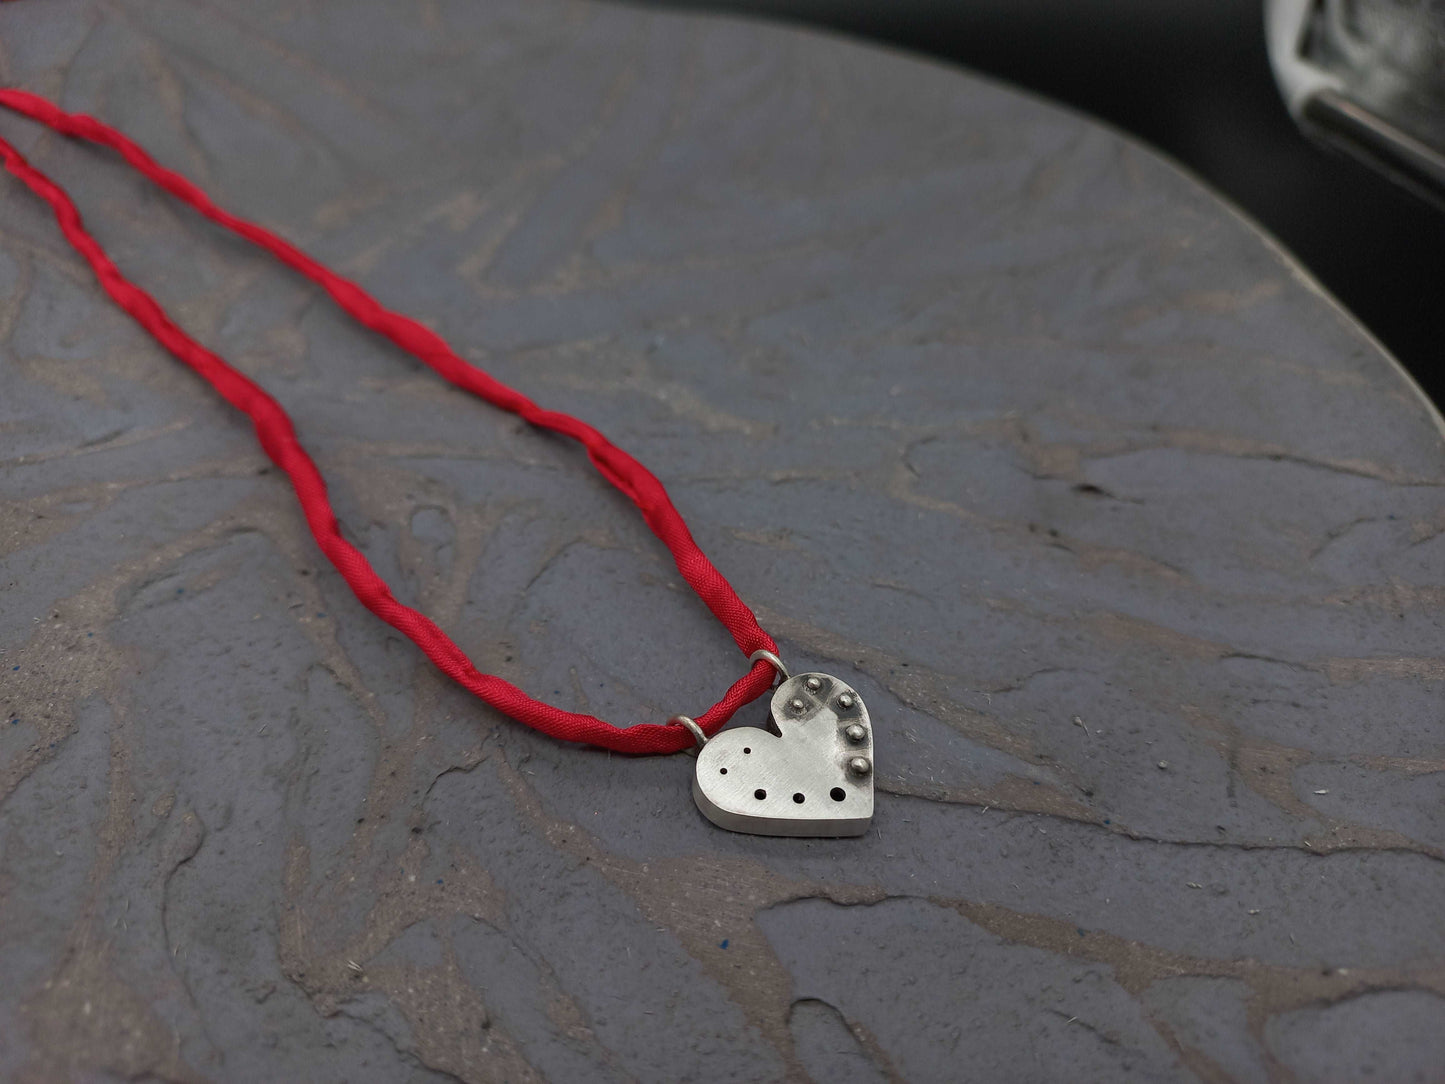 Round heart pendant with granules